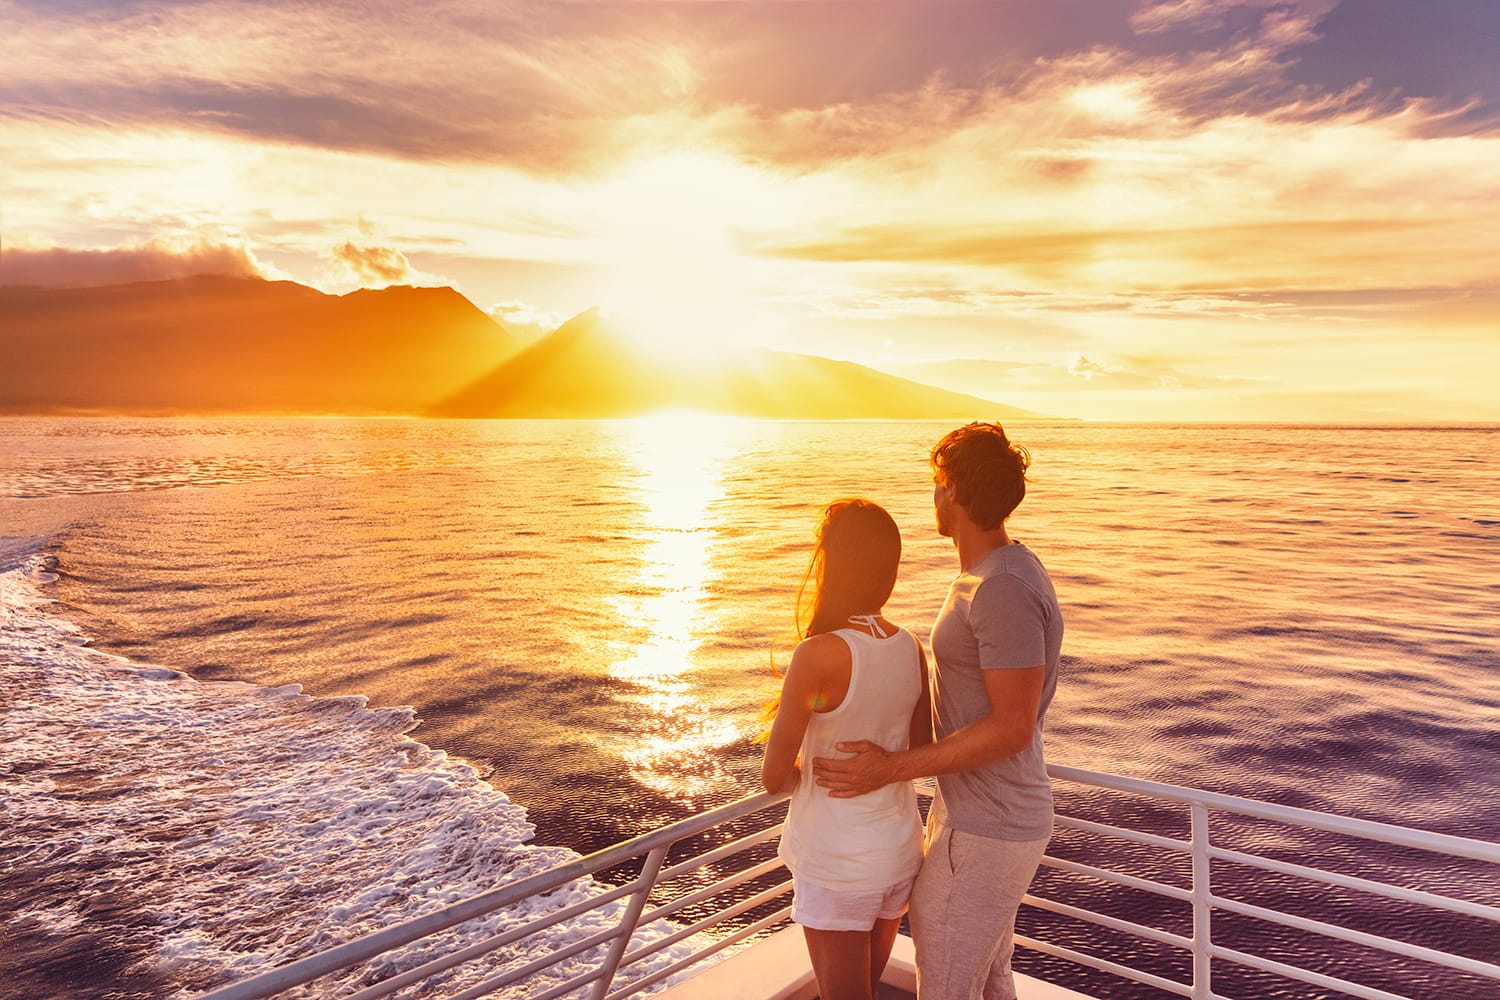 A couple on sunset cruise in Hawaii